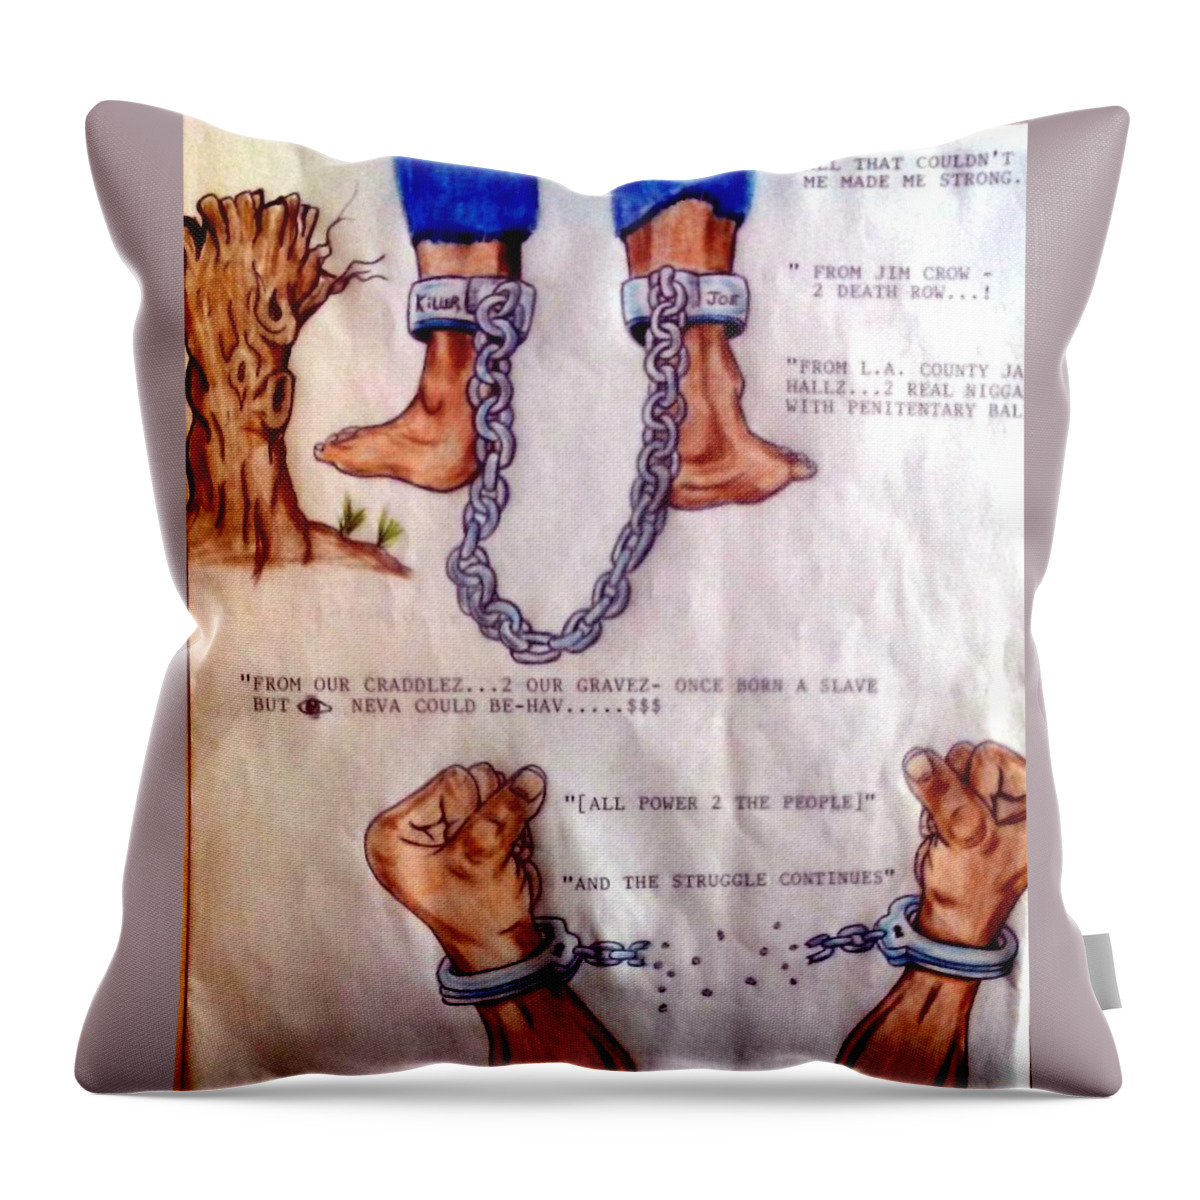 Blak Art Throw Pillow featuring the drawing from Jim Crow to death row by Joedee